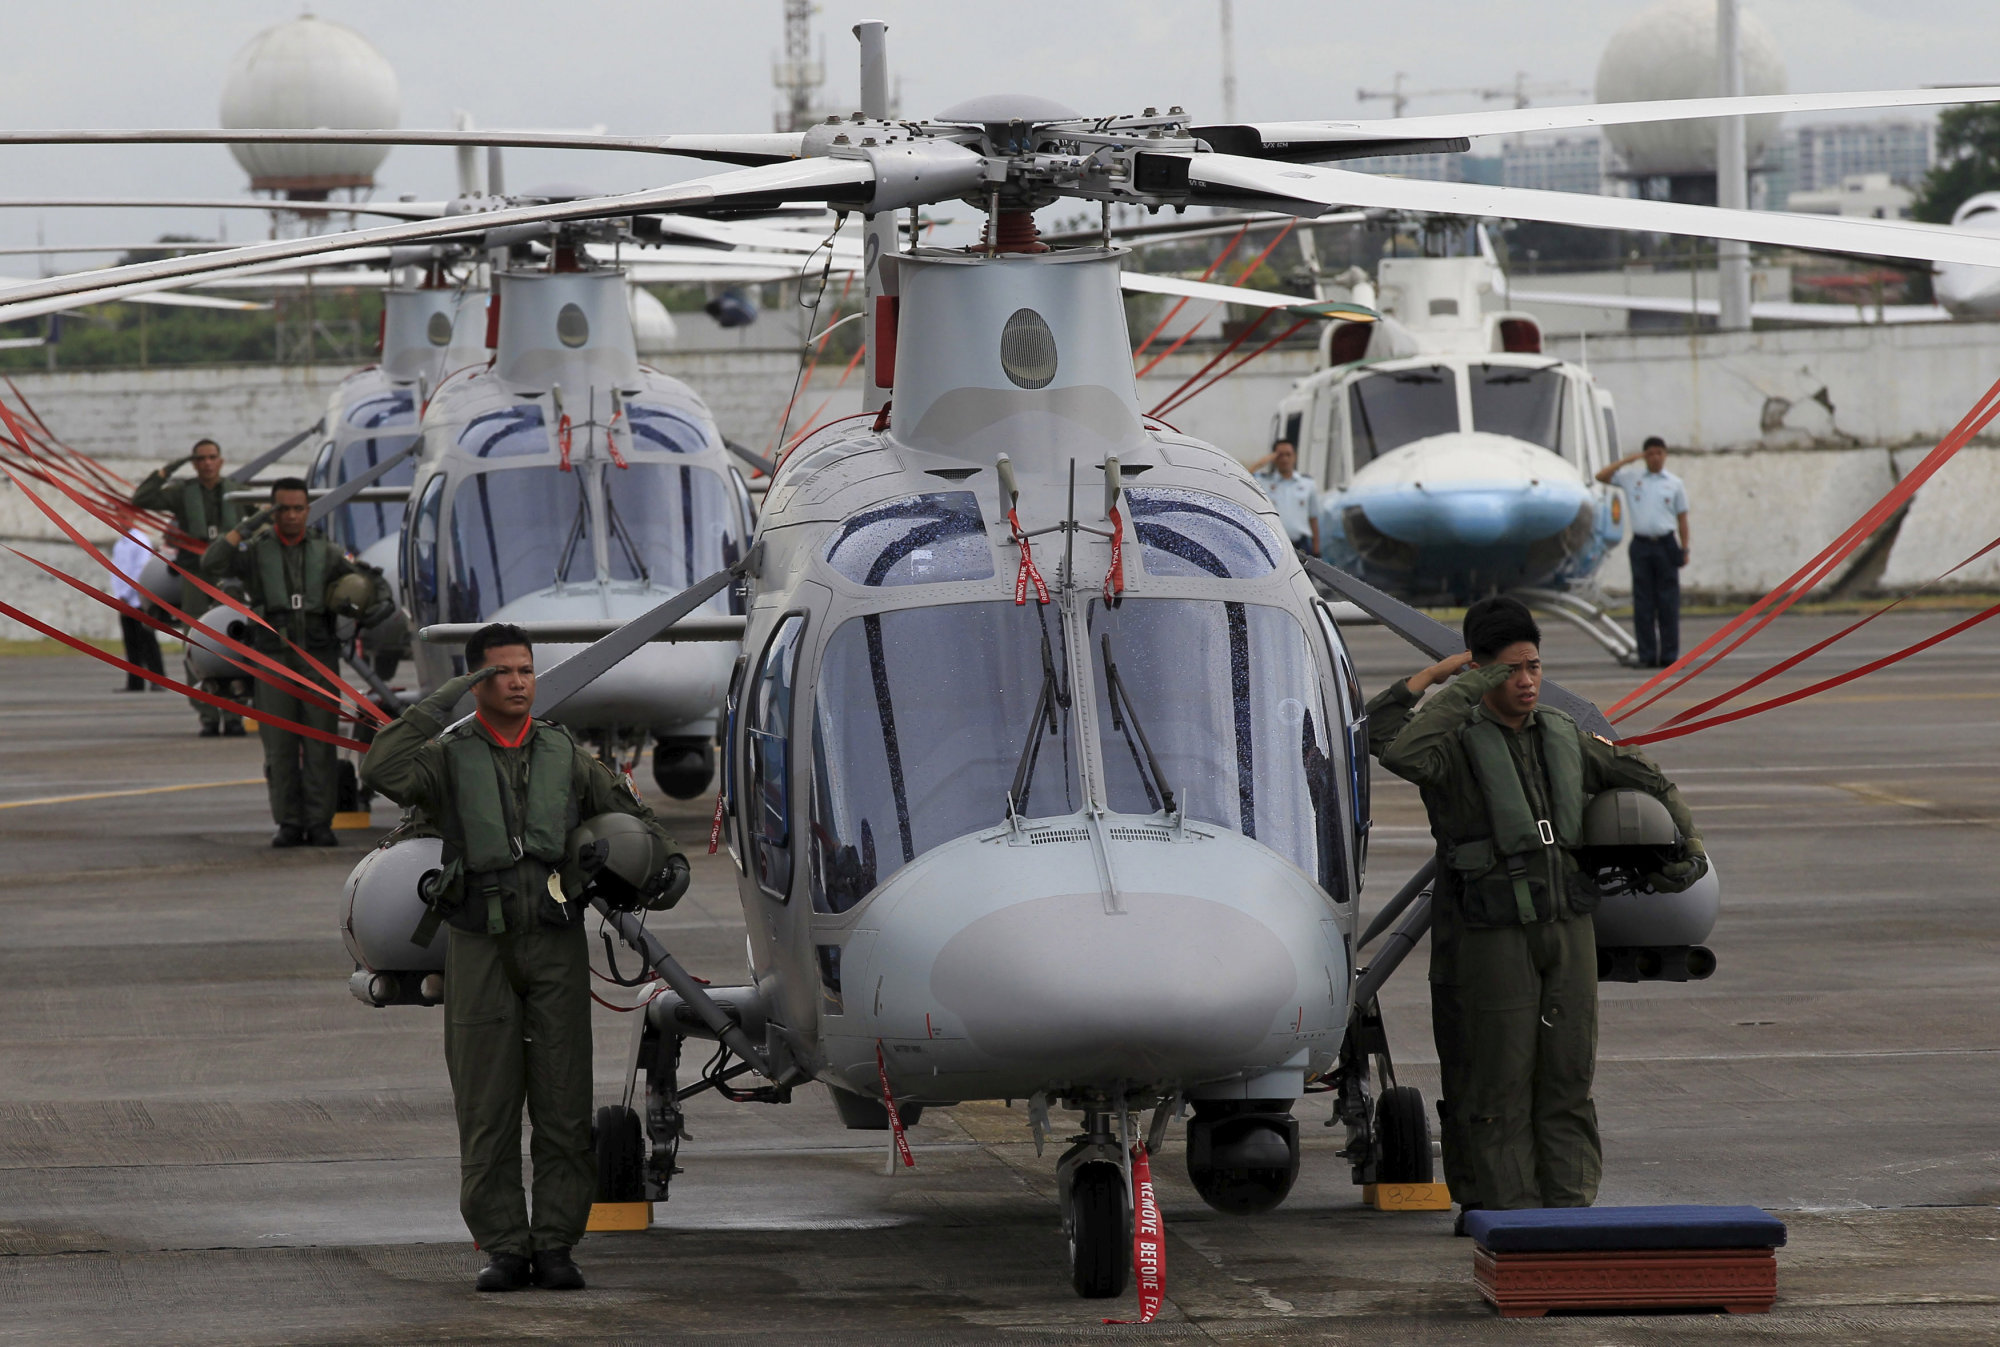 Philippine Air Force pilots stand next to newly acquired AgustaWestland AW109E helicopters during a ceremony at Villamor Air Base in Manila in December 2015. | REUTERS